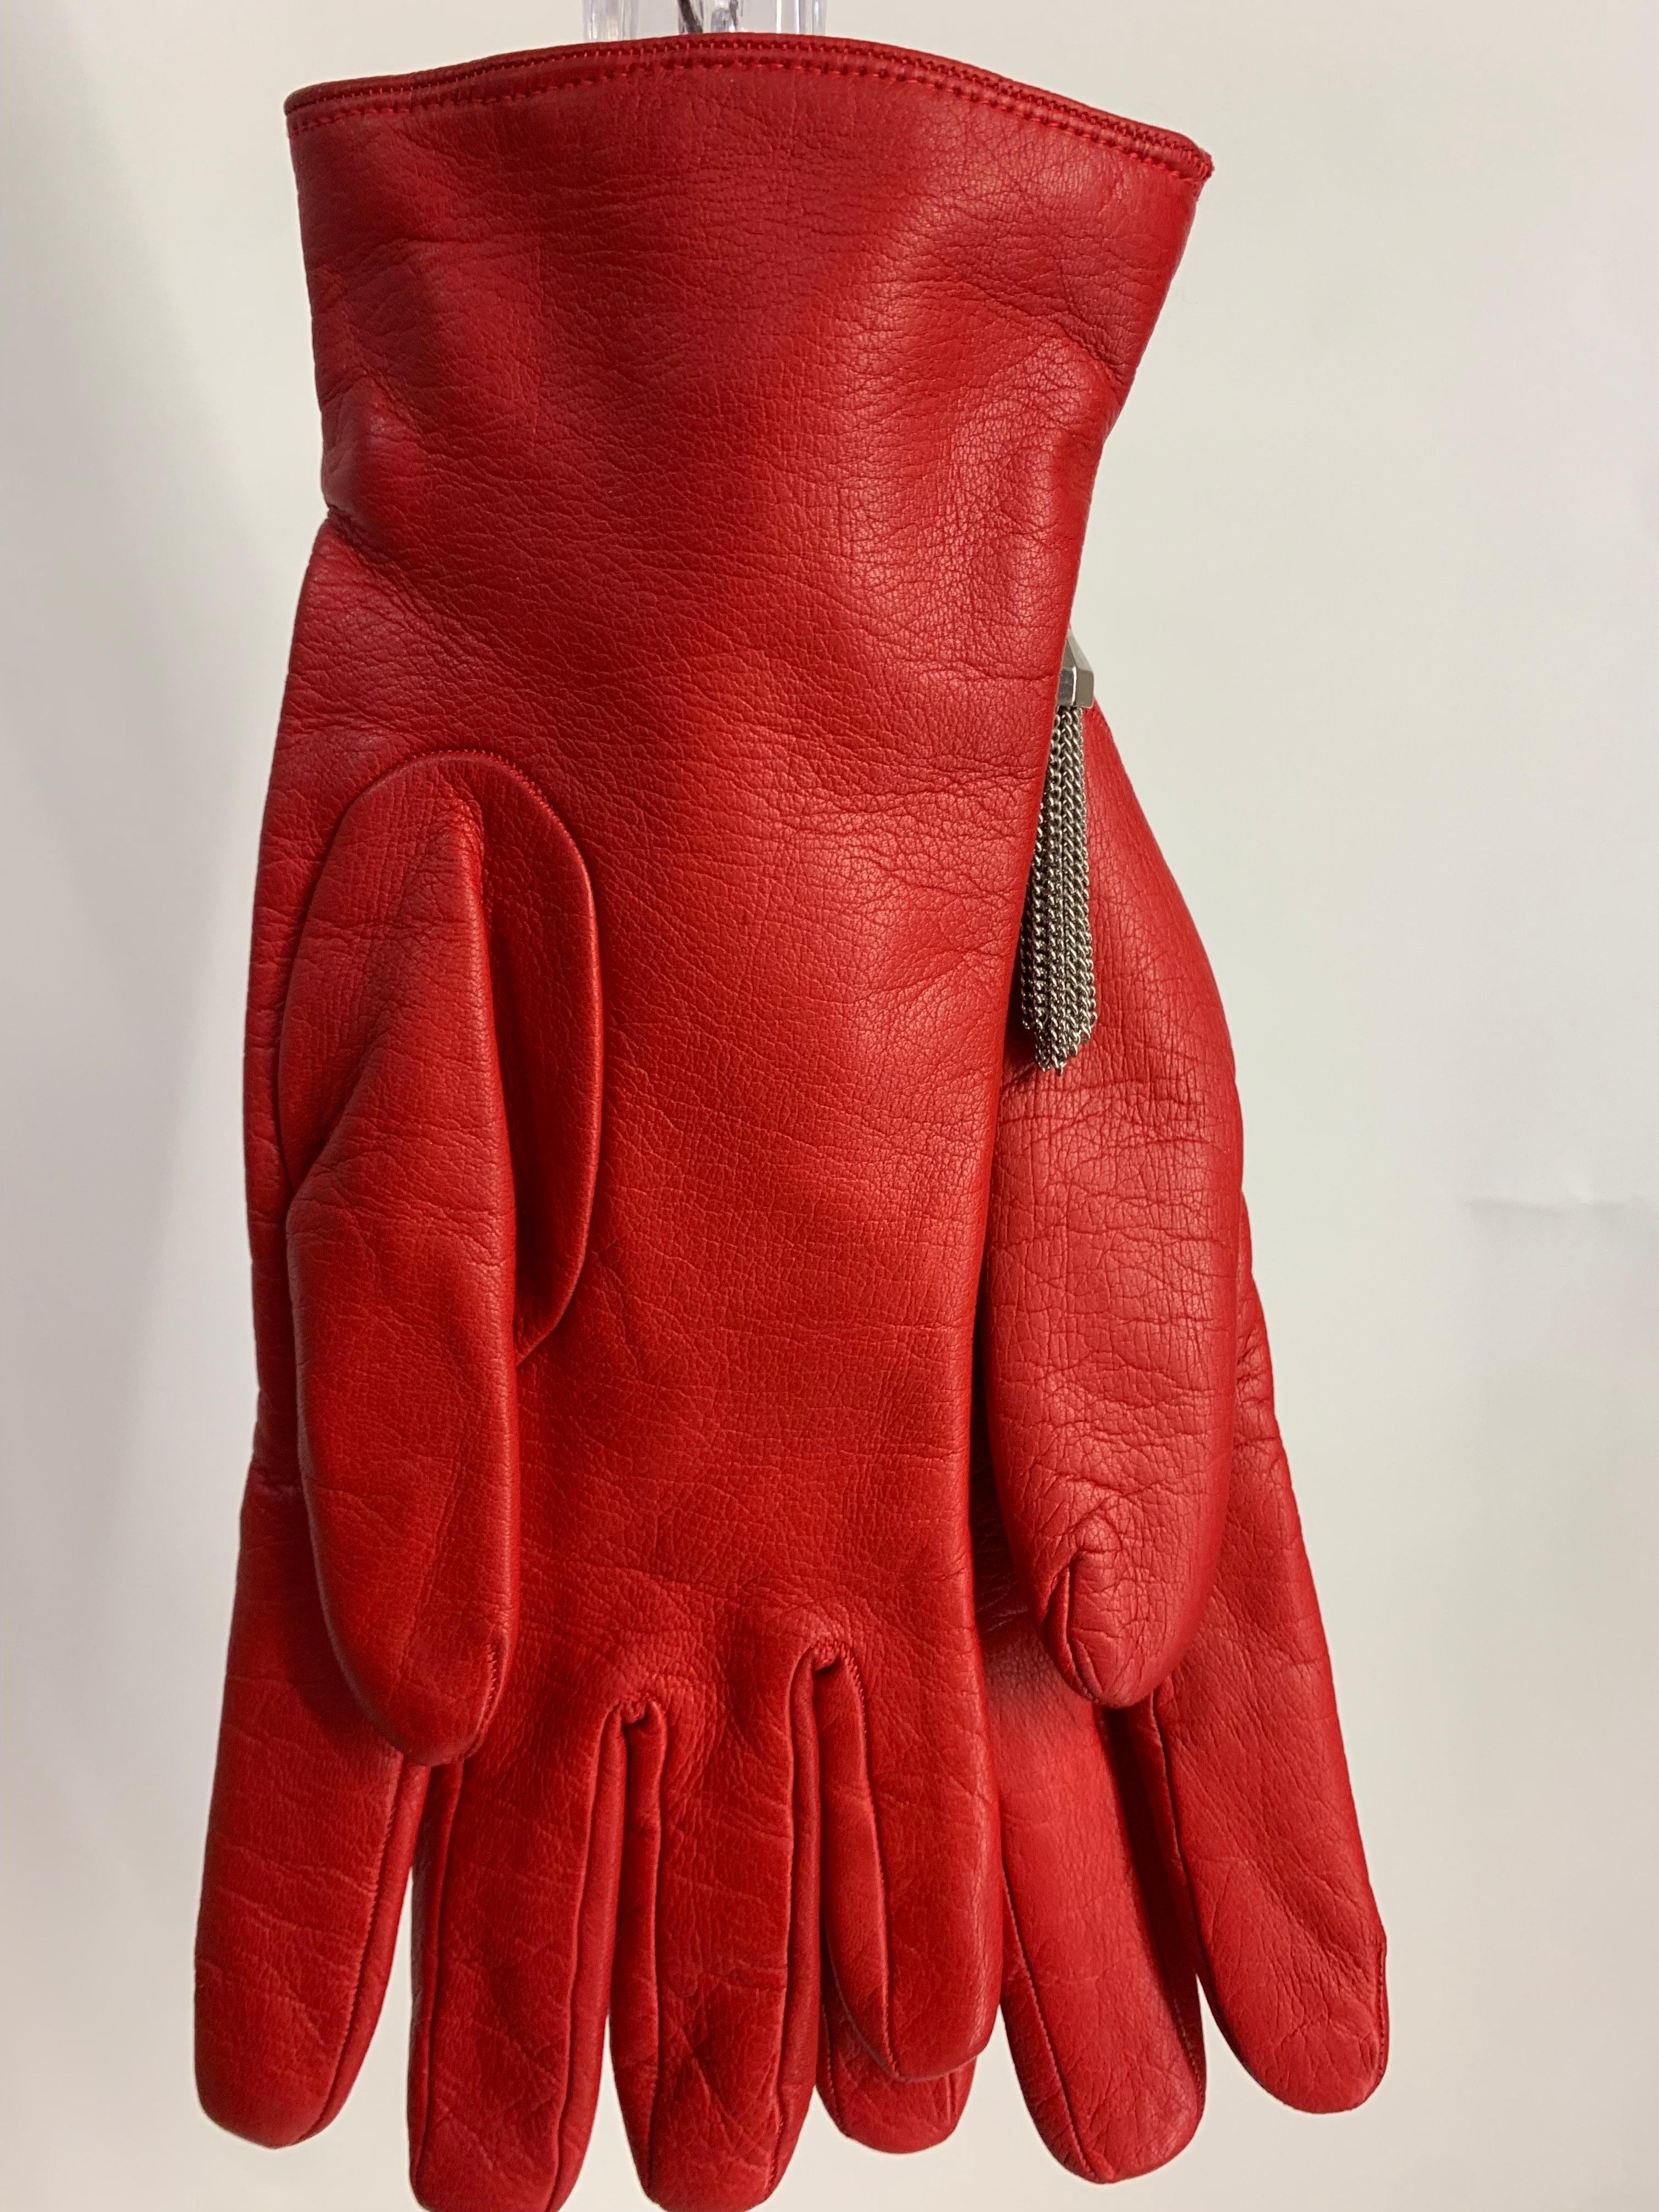 1980s Gianni Versace Red Kid Leather Gloves w Cashmere Lining & Tassel Chain  For Sale 6